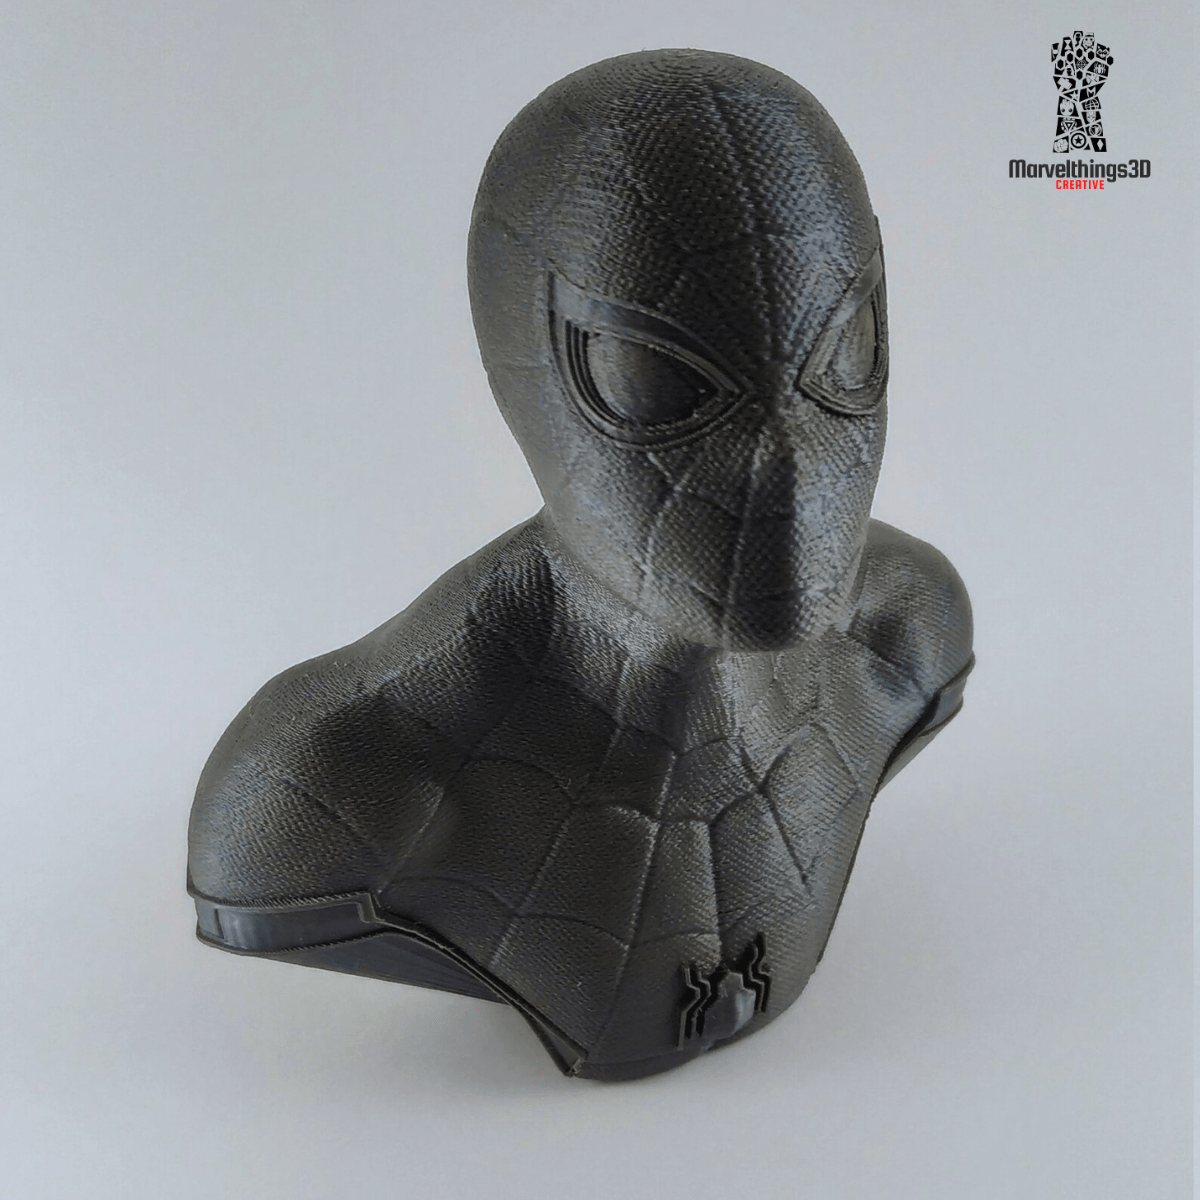 Marvel's High Detailed Bust Figurine Comic Version 3D Printed